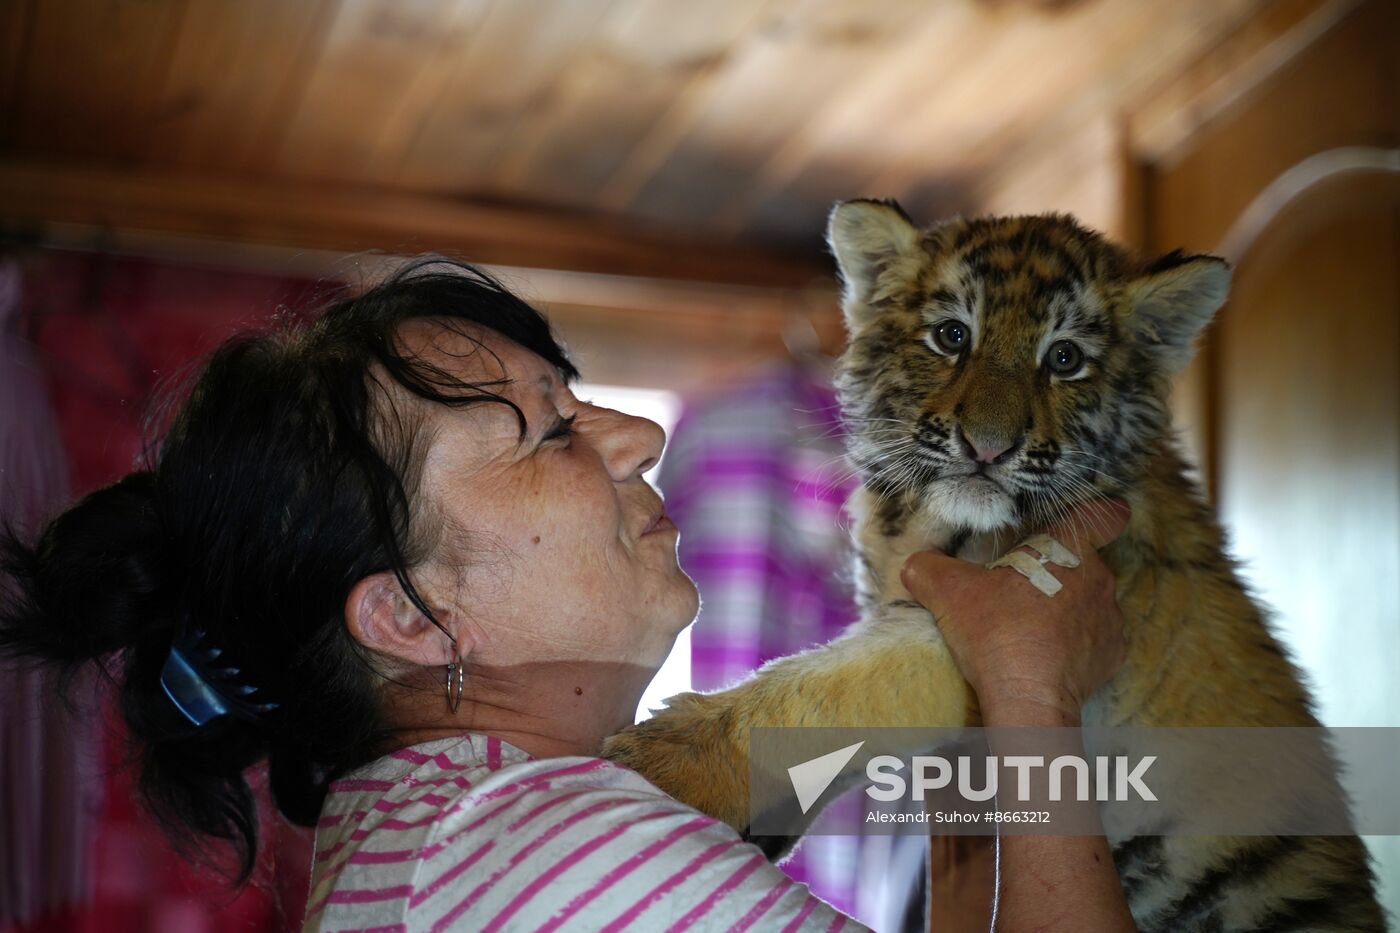 Russia DPR Zoo Tiger Cubs